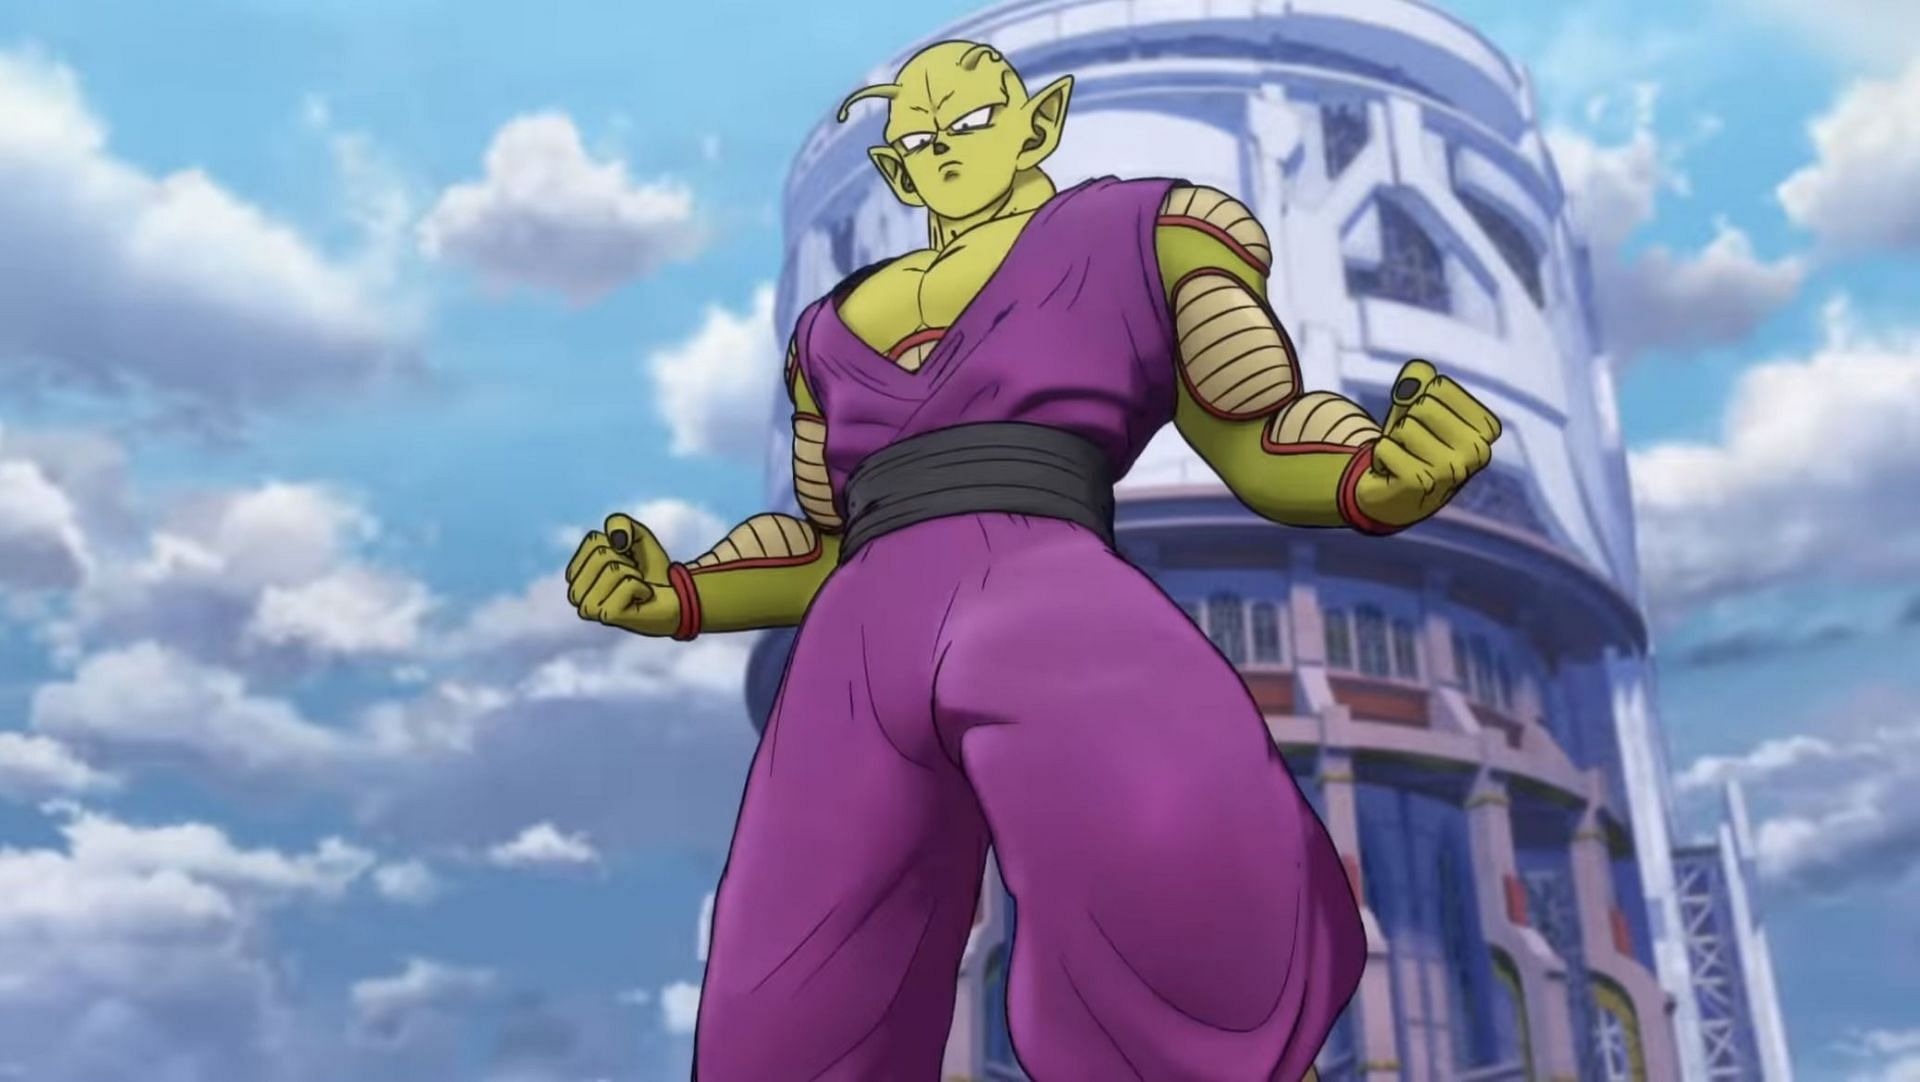 Piccolo as seen in the anime (Image via Toei Animation)